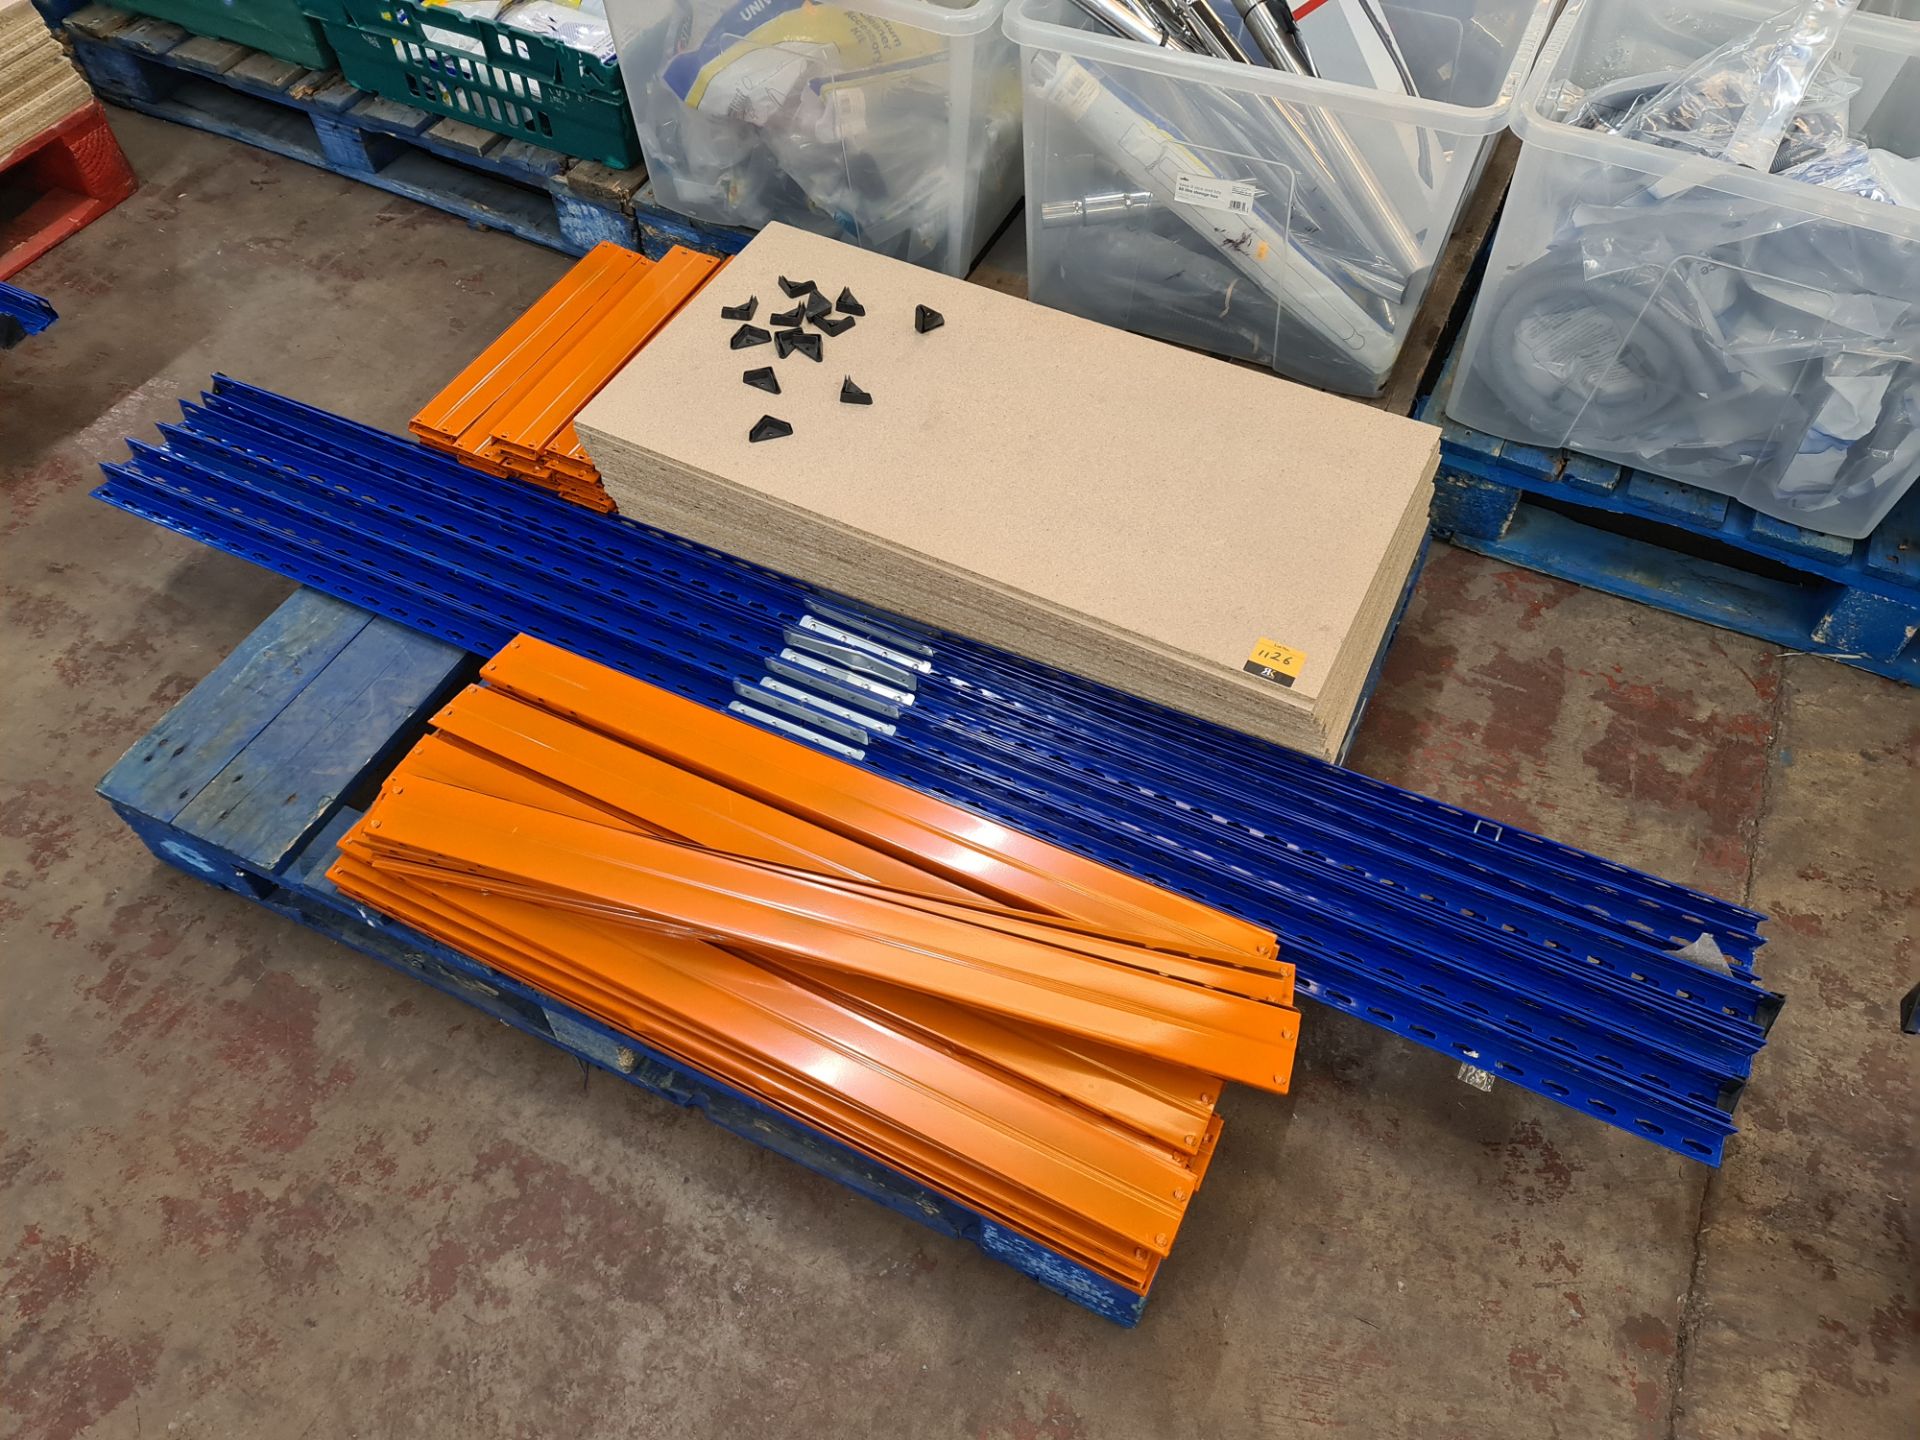 5 bays of blue and orange racking each with four shelves. All five bays have been disassembled and